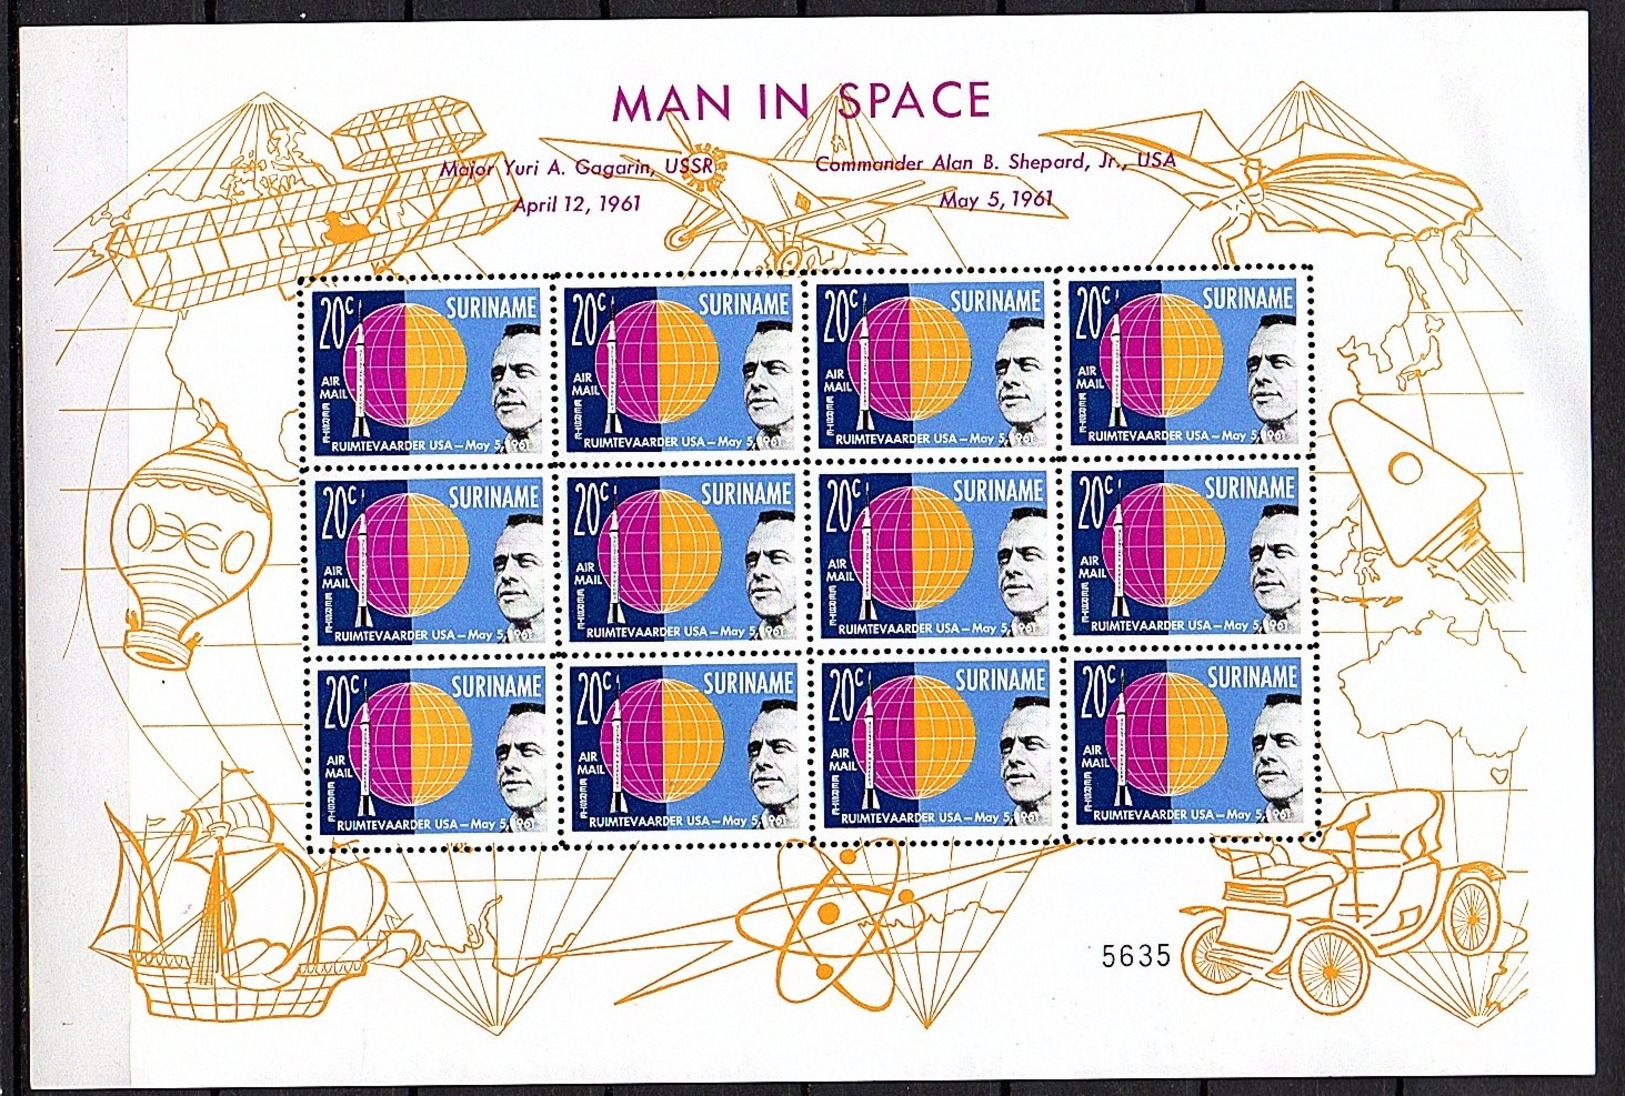 Man In Space 1961 Unfolded20 Cts Sheet MNH NO Perforation Through The Margins (157) - Suriname ... - 1975